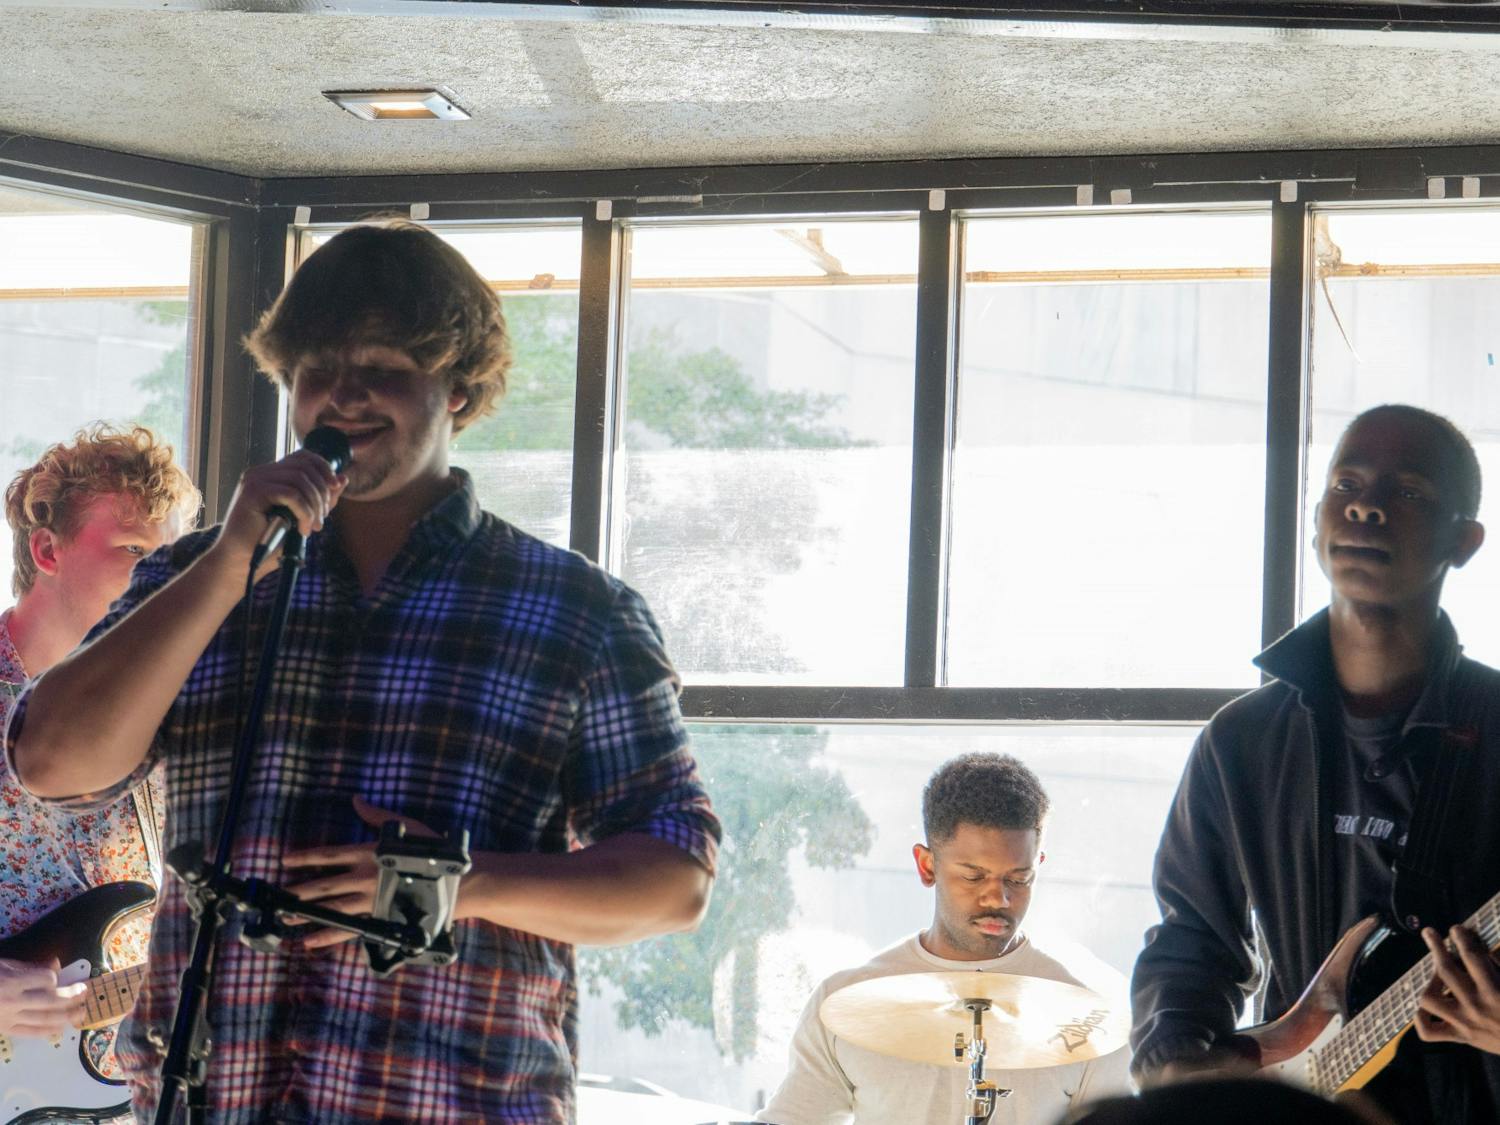 Local band Outta Pocket performs at The Joint on Main 1710, a local jazz and tapas restaurant in Columbia, South Carolina on March 25, 2022. Rex Hagins, Outta Pocket’s guitarist, recommends emerging artists to engage and be active within their community.